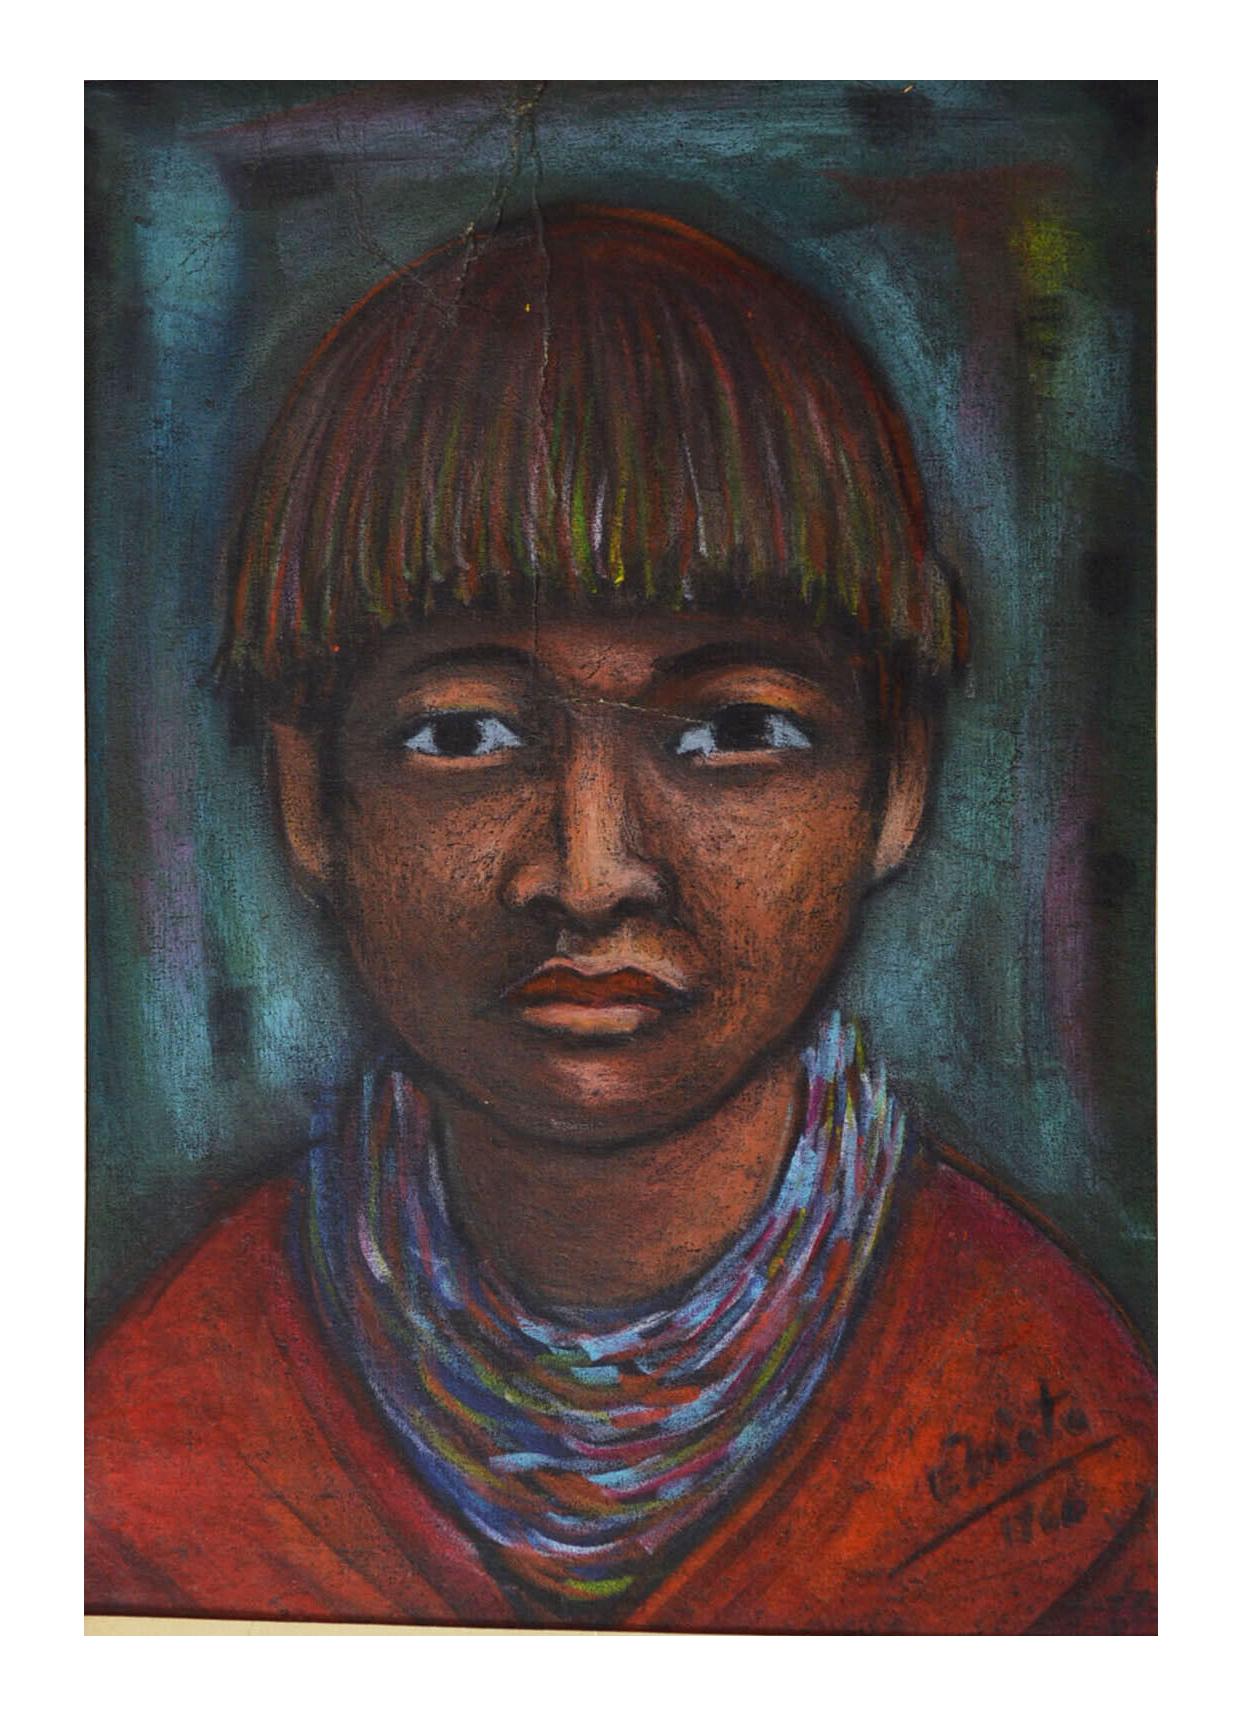 A fine bright and vibrant original crayon portrait on a young Indigenous boy from the Colombian Amazon By Manuel Eduardo Nieto

Signed and dated 1966 on the front. Marked verso 